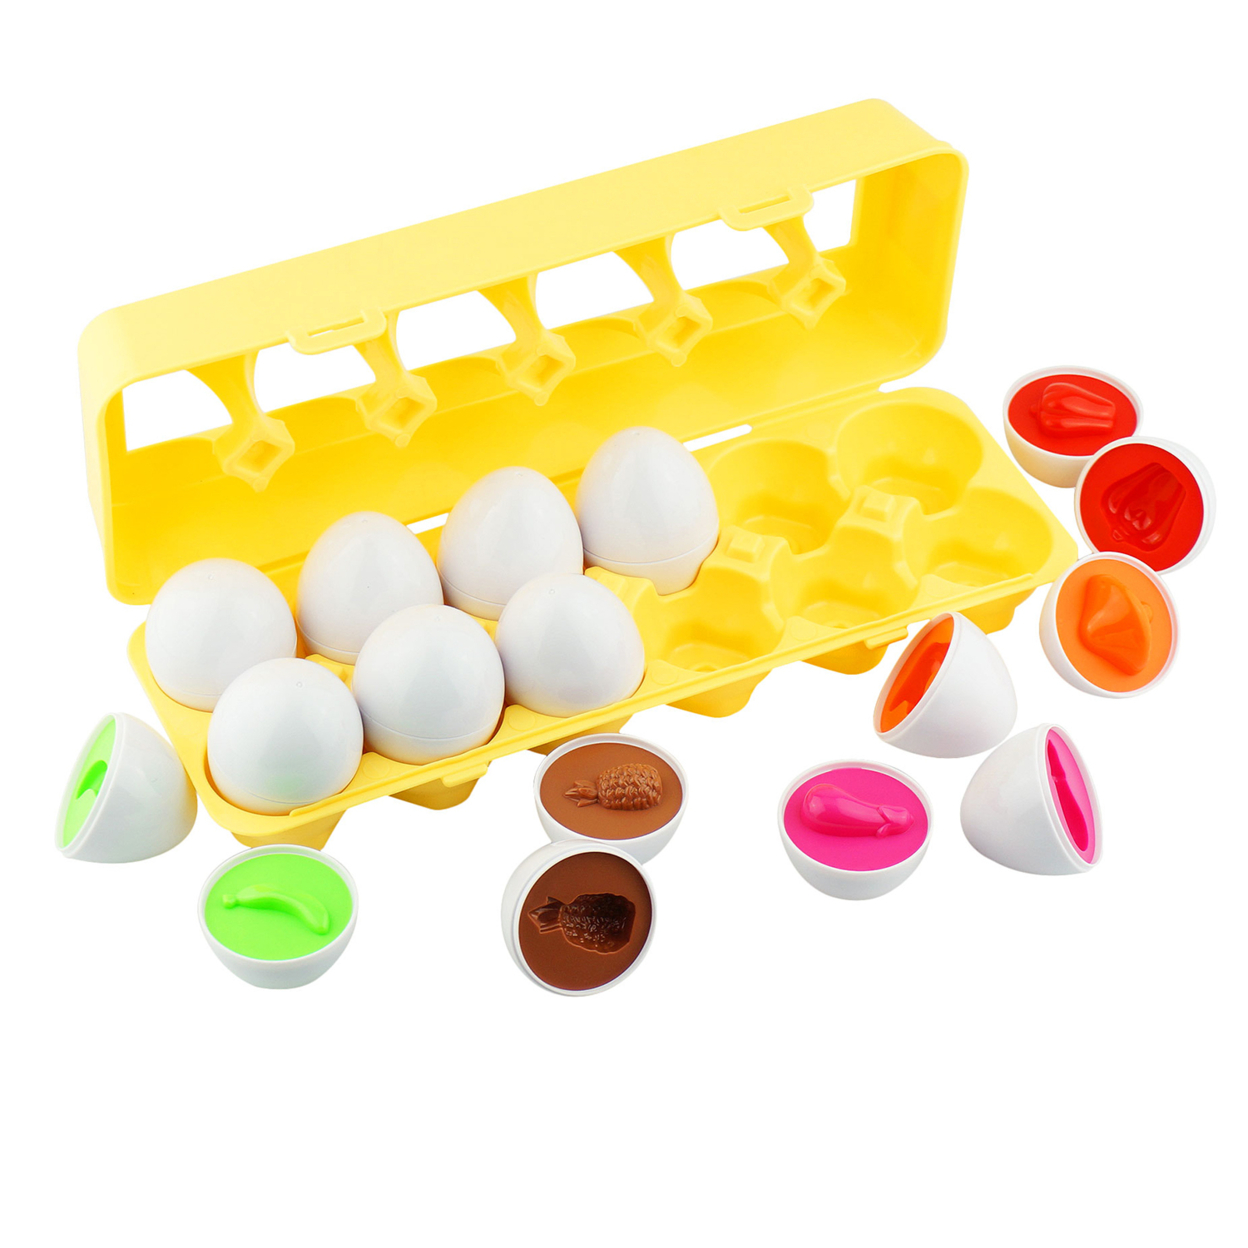 Dimple 12 Match And Play Vegetable Matching Egg Easter Toy With Holder - Educational Color Sorting Toys - Play Egg Puzzle Set